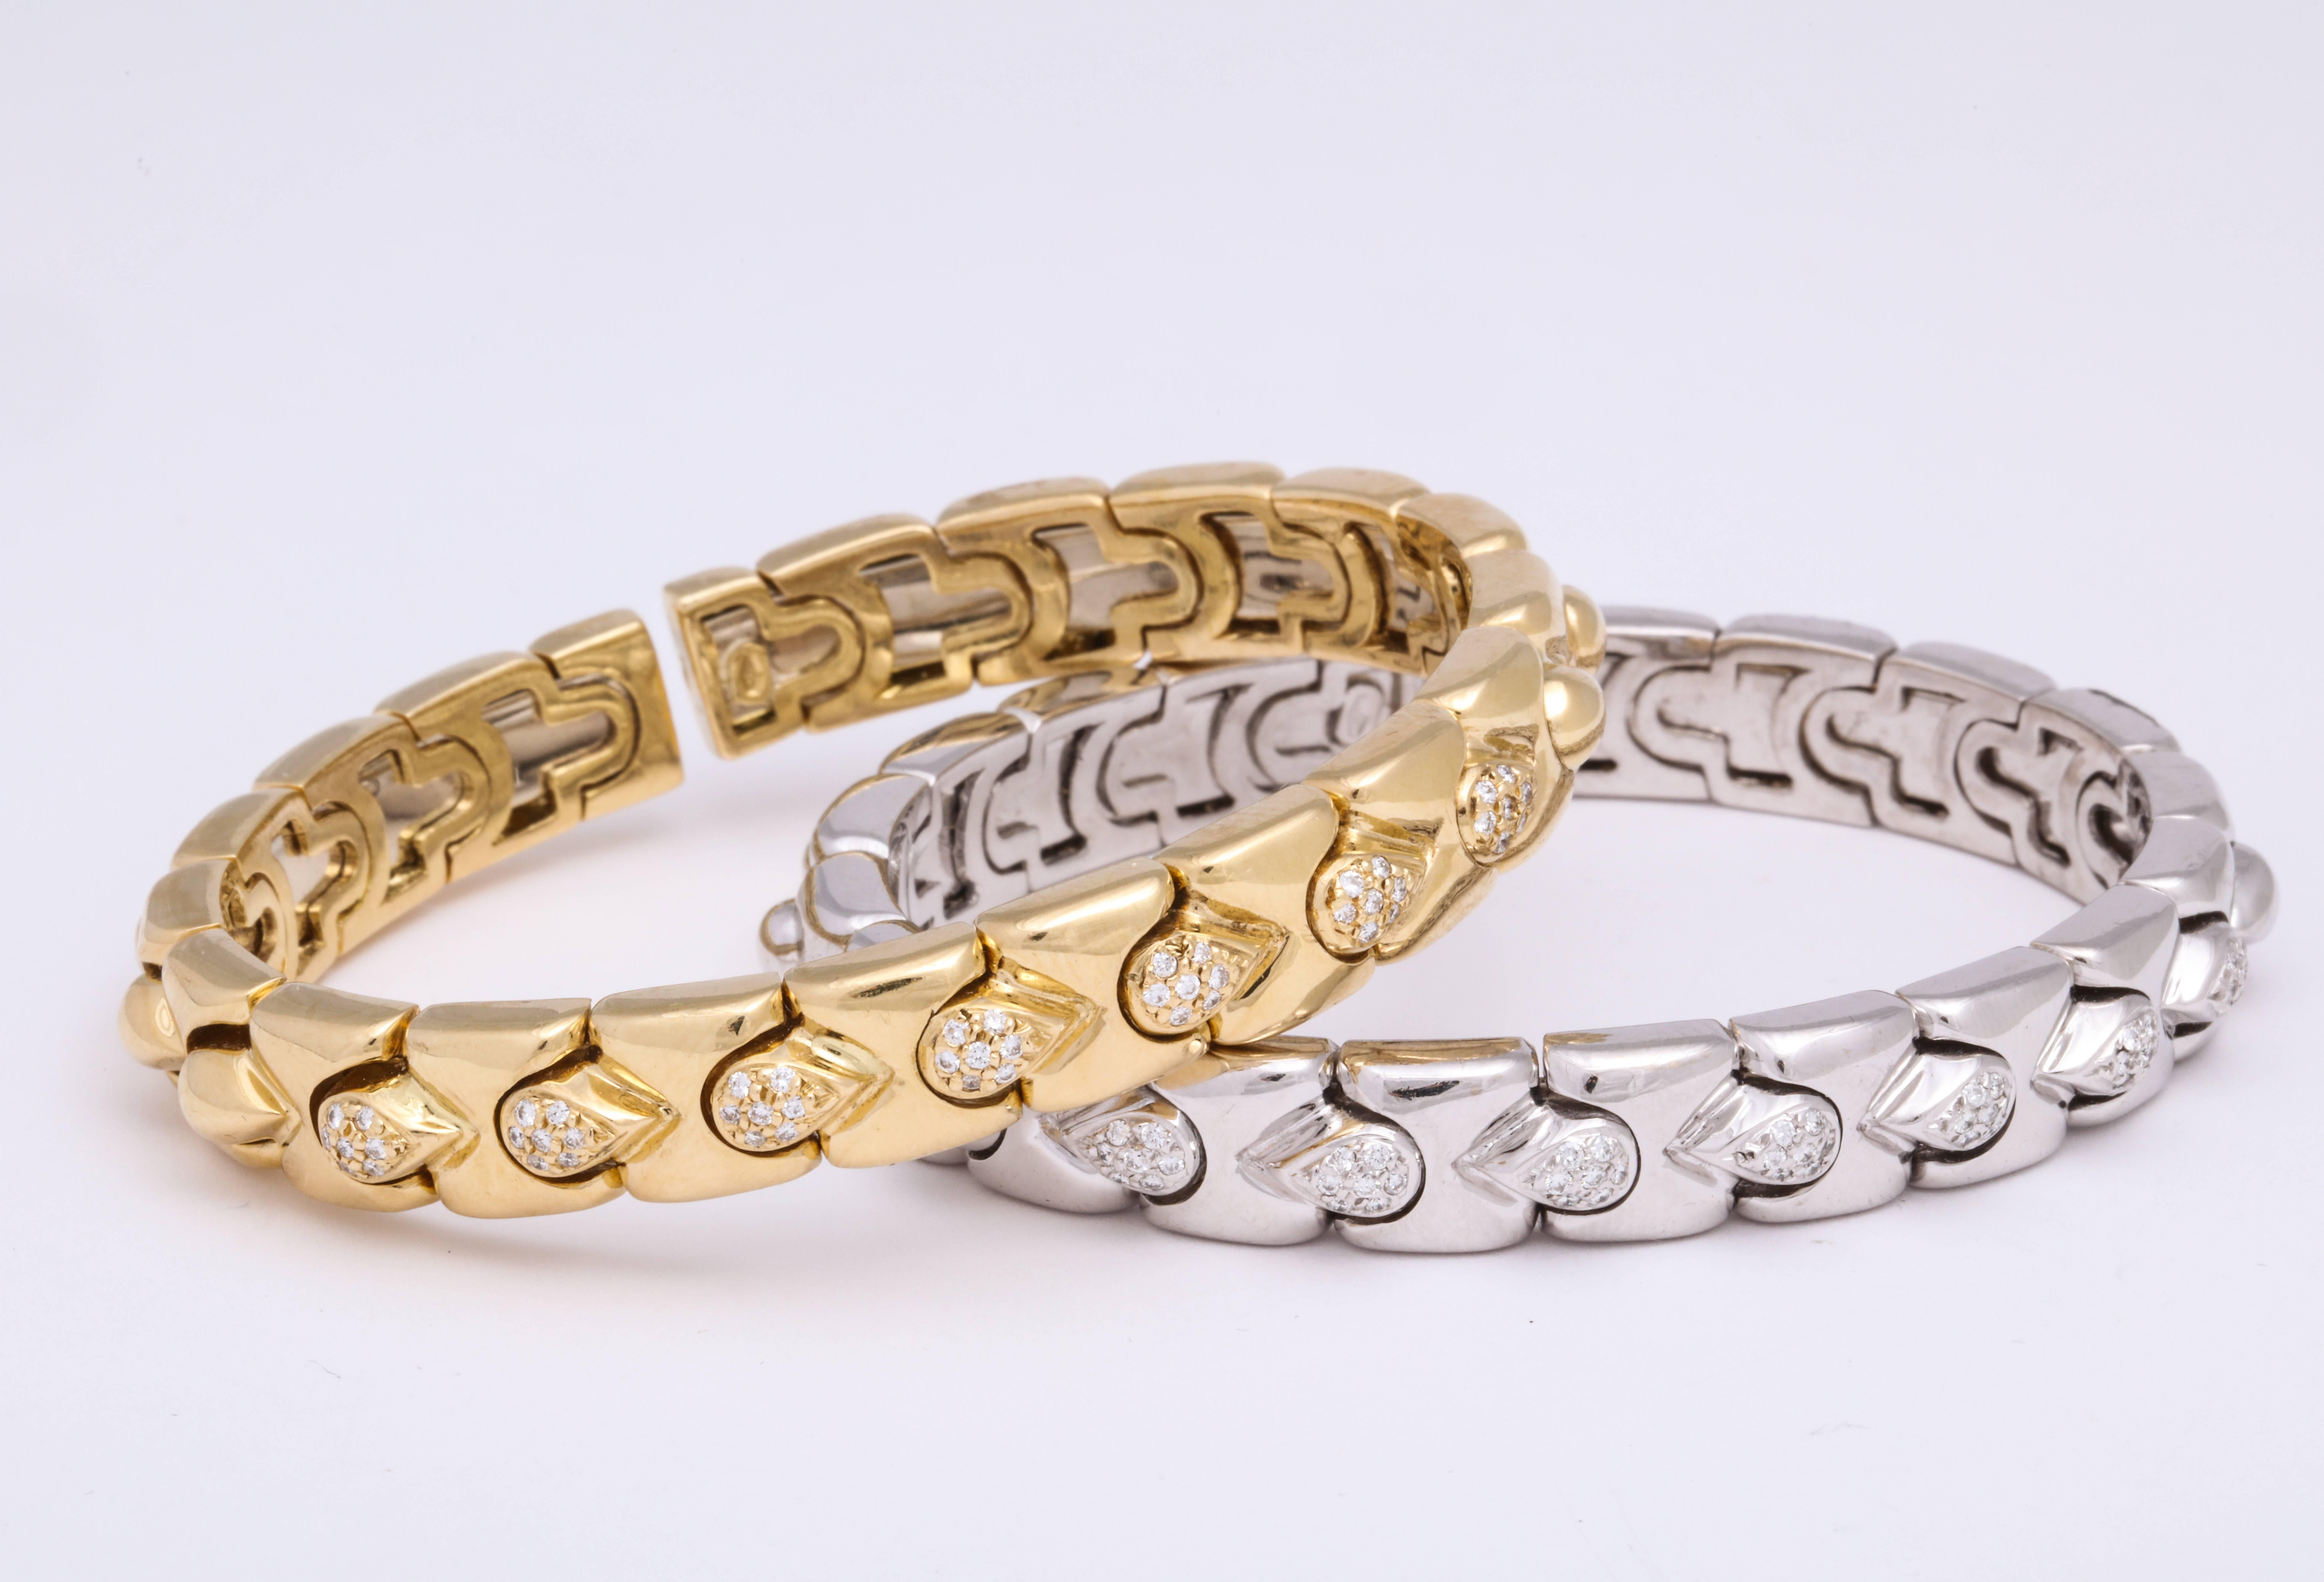 Contemporary 18 Karat yellow gold and matching 18 Karat white gold stack bracelets composed of polished links alternating with pave'-set diamond accented links: combined total weight: 0.50 carats mounted on spring for a fitted wear. This is offered